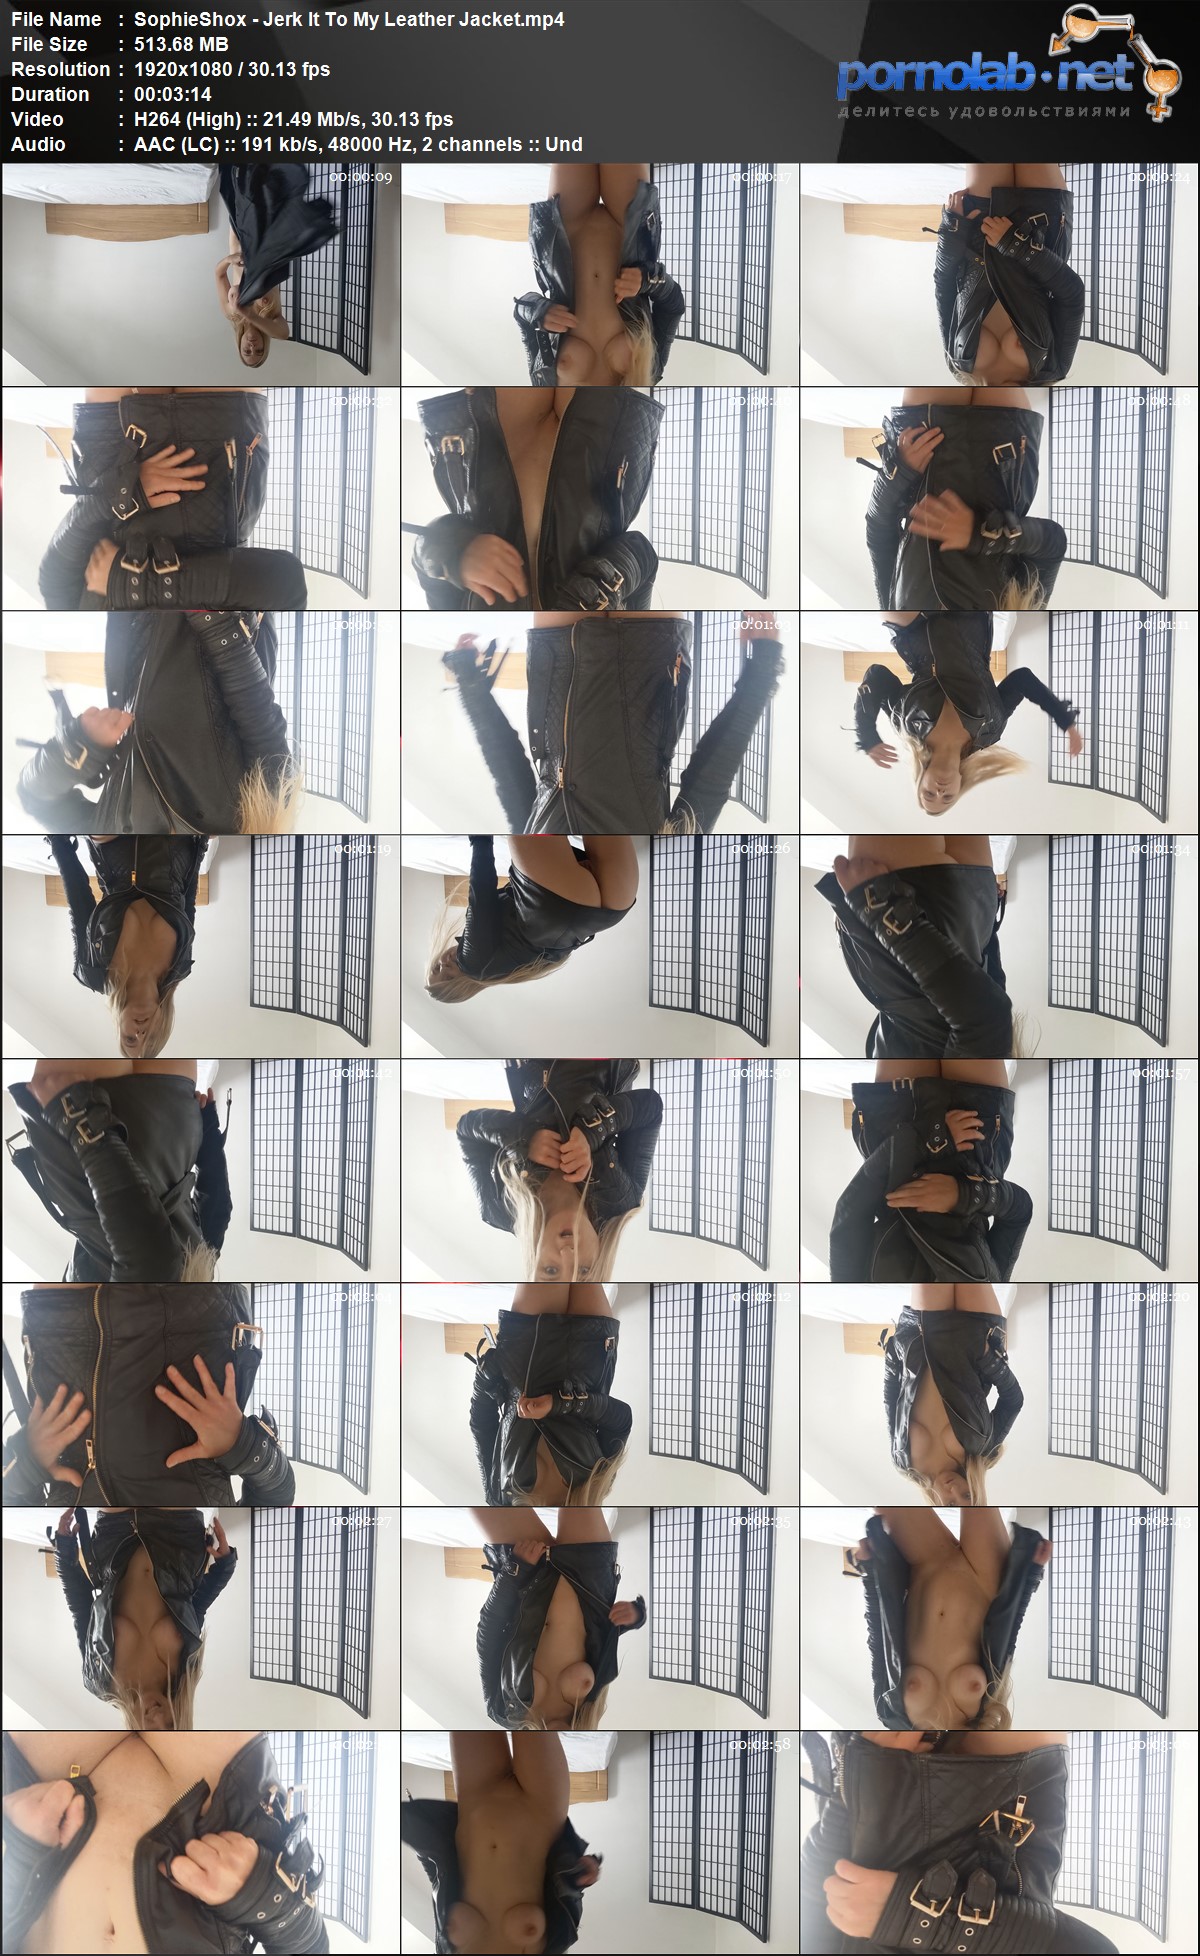 Sophie Shox Jerk It To My Leather Jacket mp 4